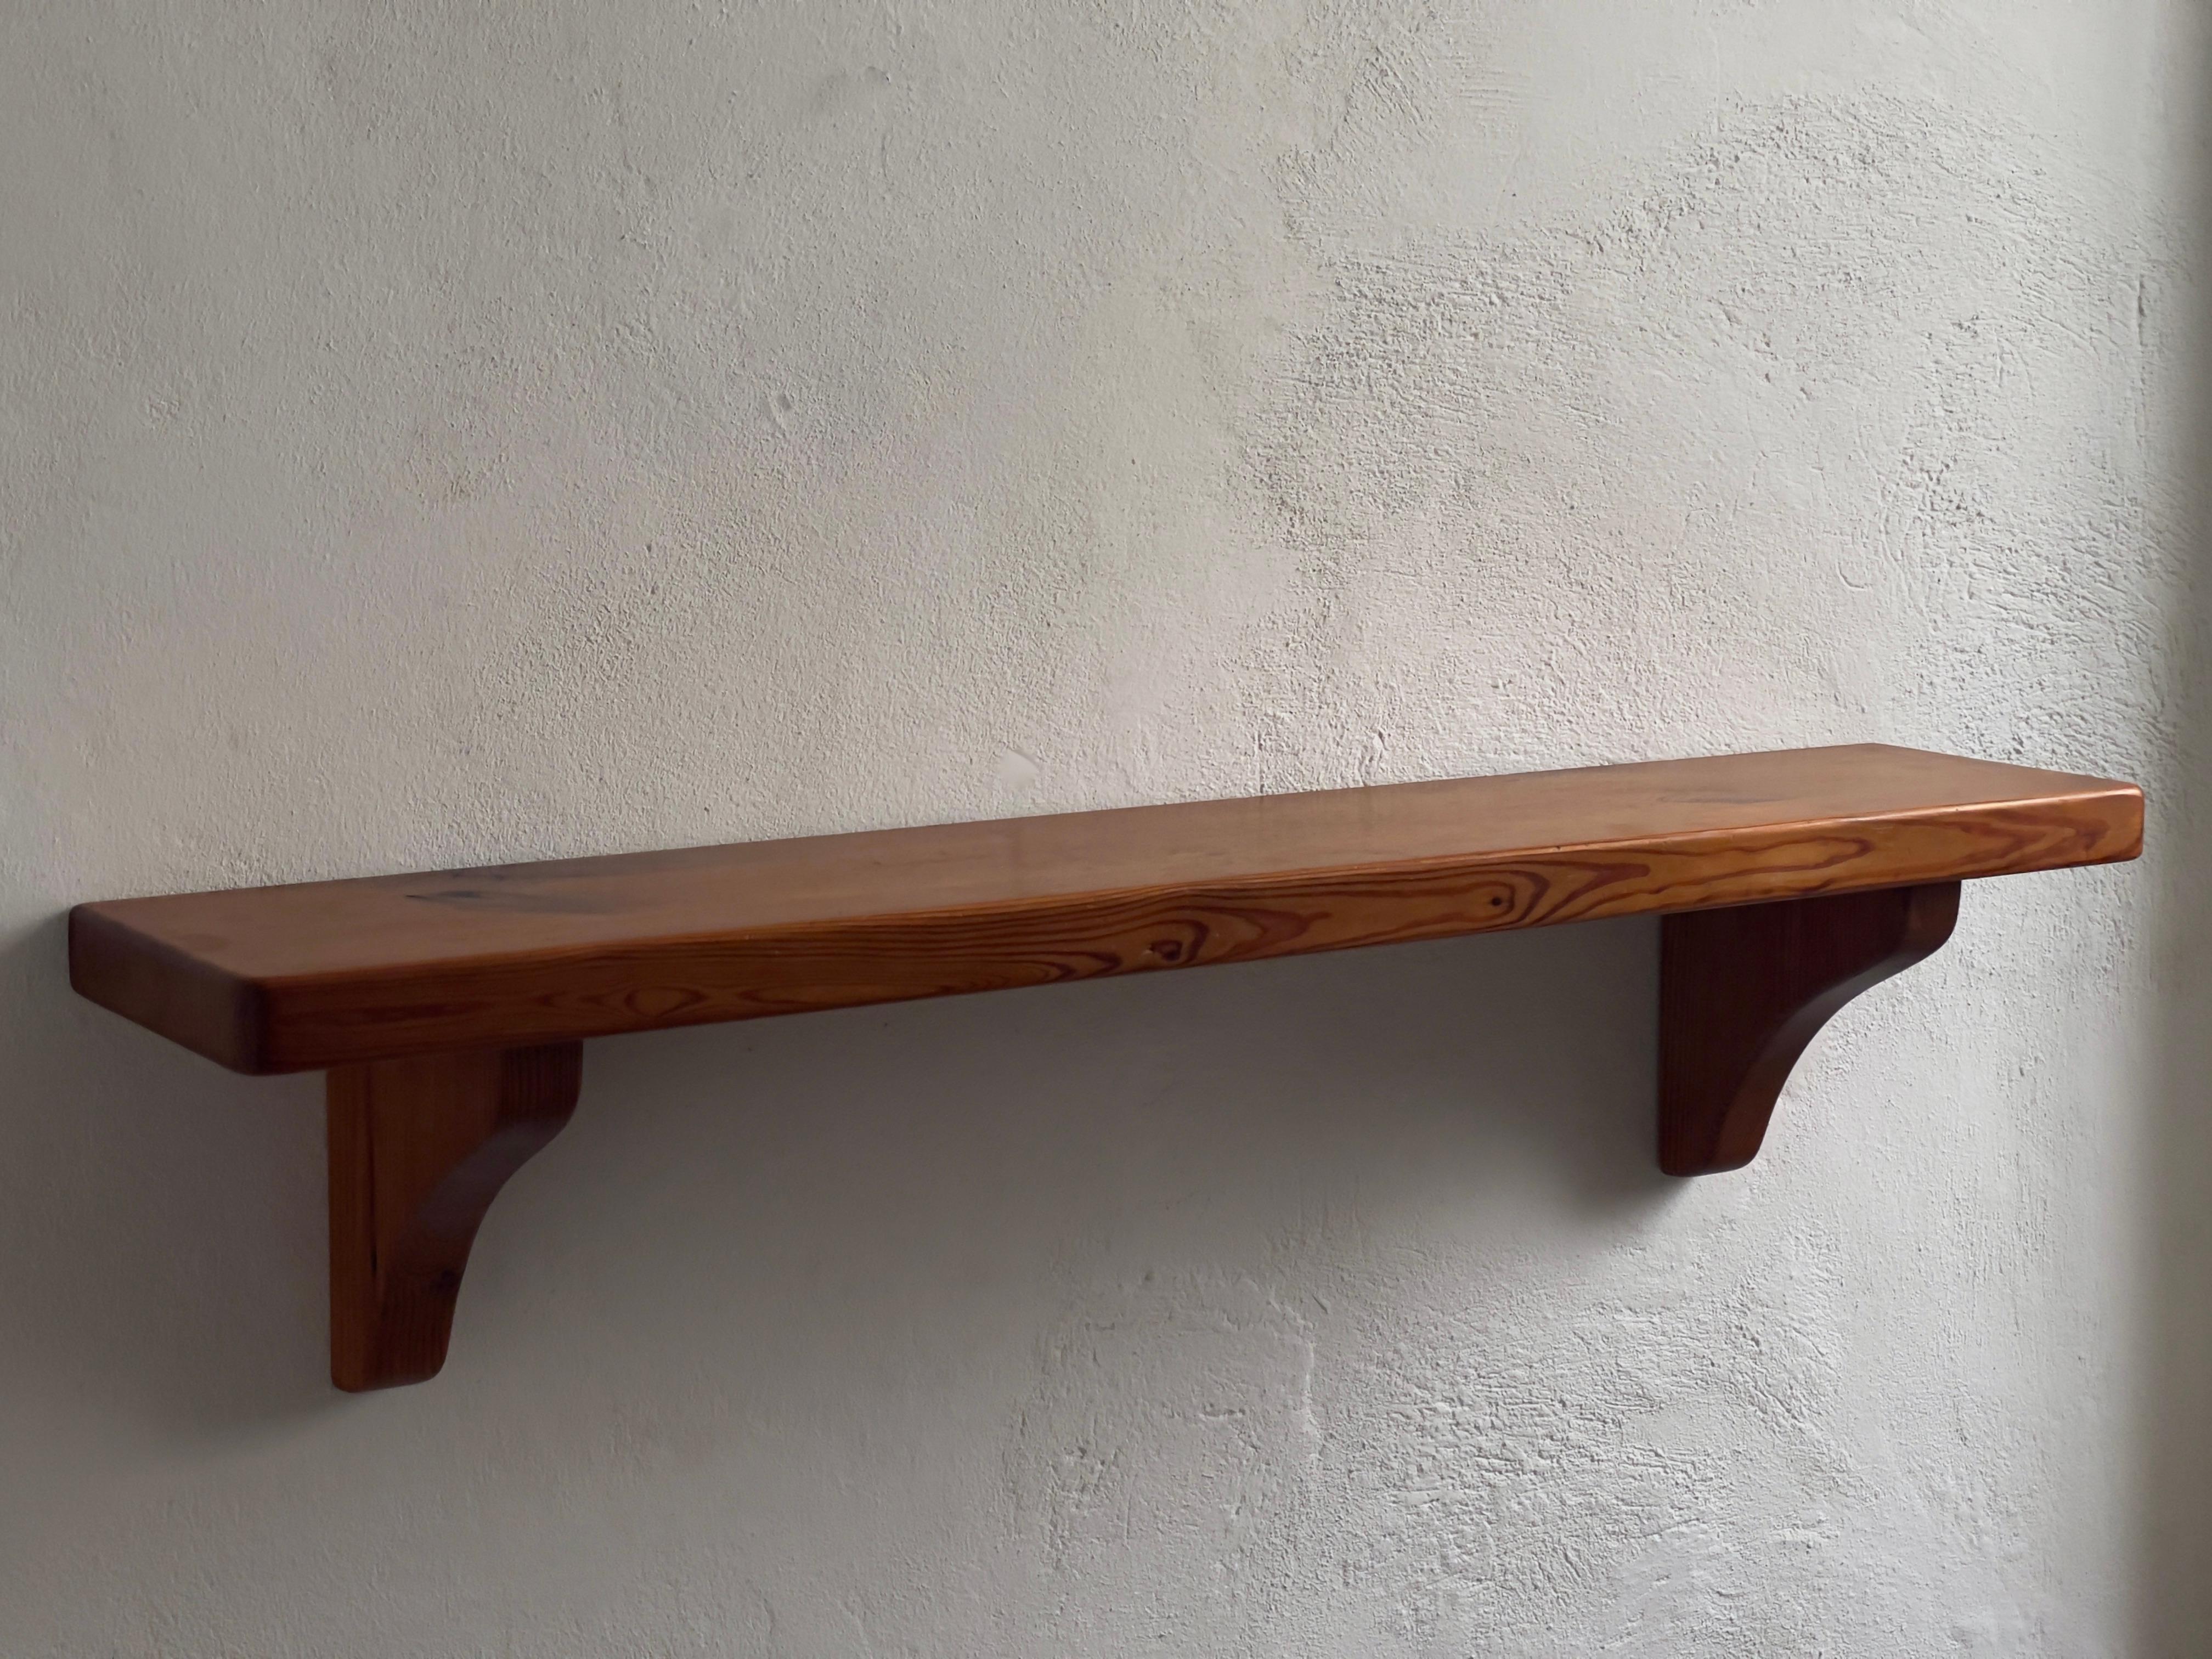 Late 20th Century Swedish Modern Patinated  Pine Shelf in the style of Axel Einar Hjorth, 1970s For Sale